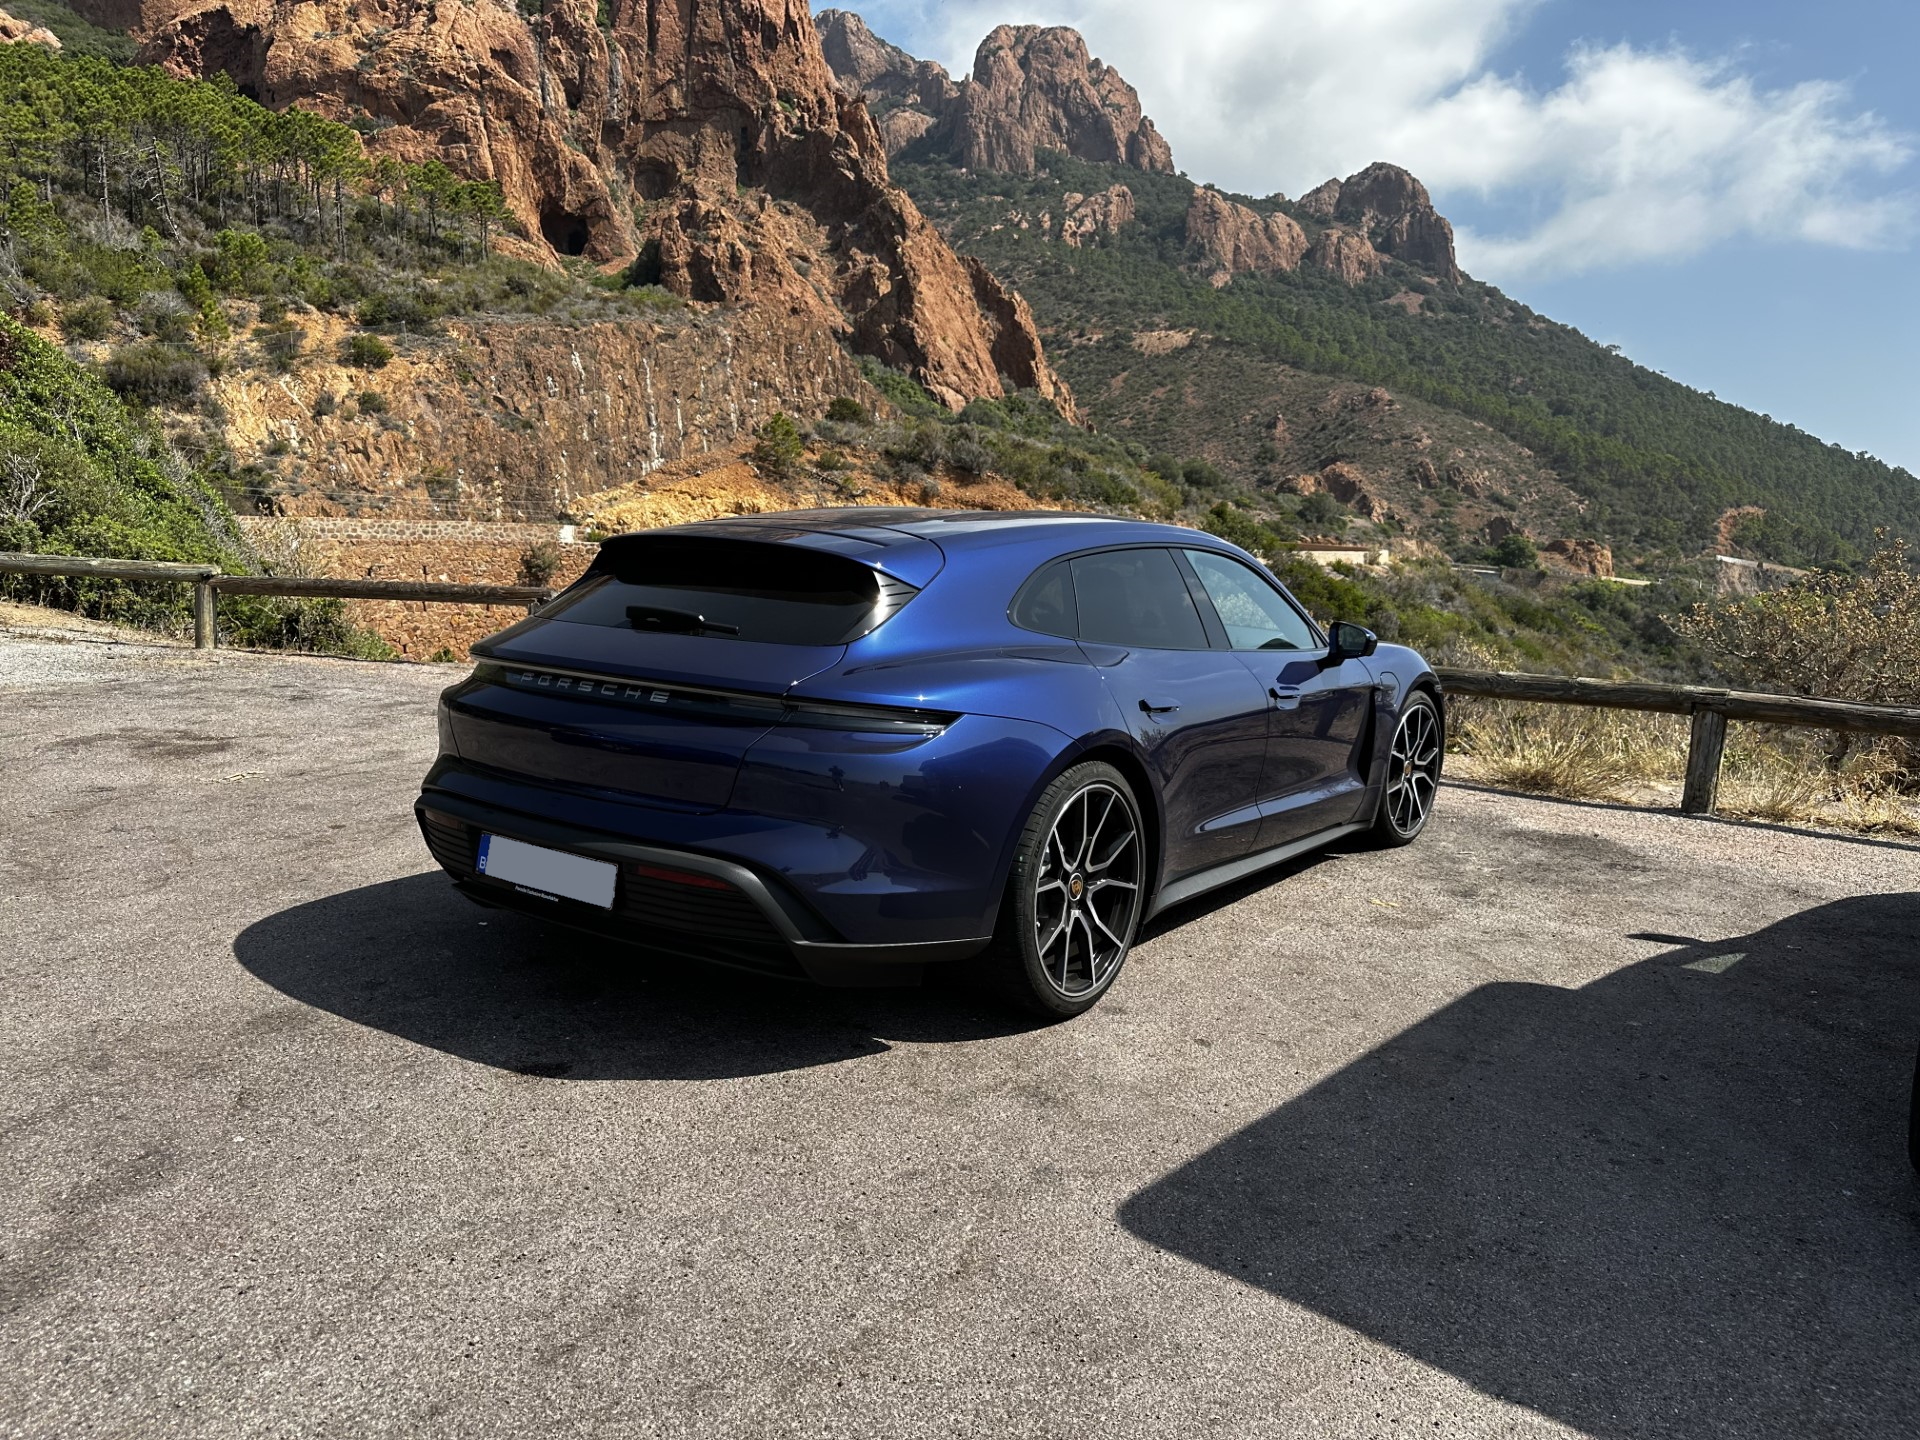 Porsche Taycan Location! Location! Location!  Post Artistic Photos of Your Taycan with Scenery 2